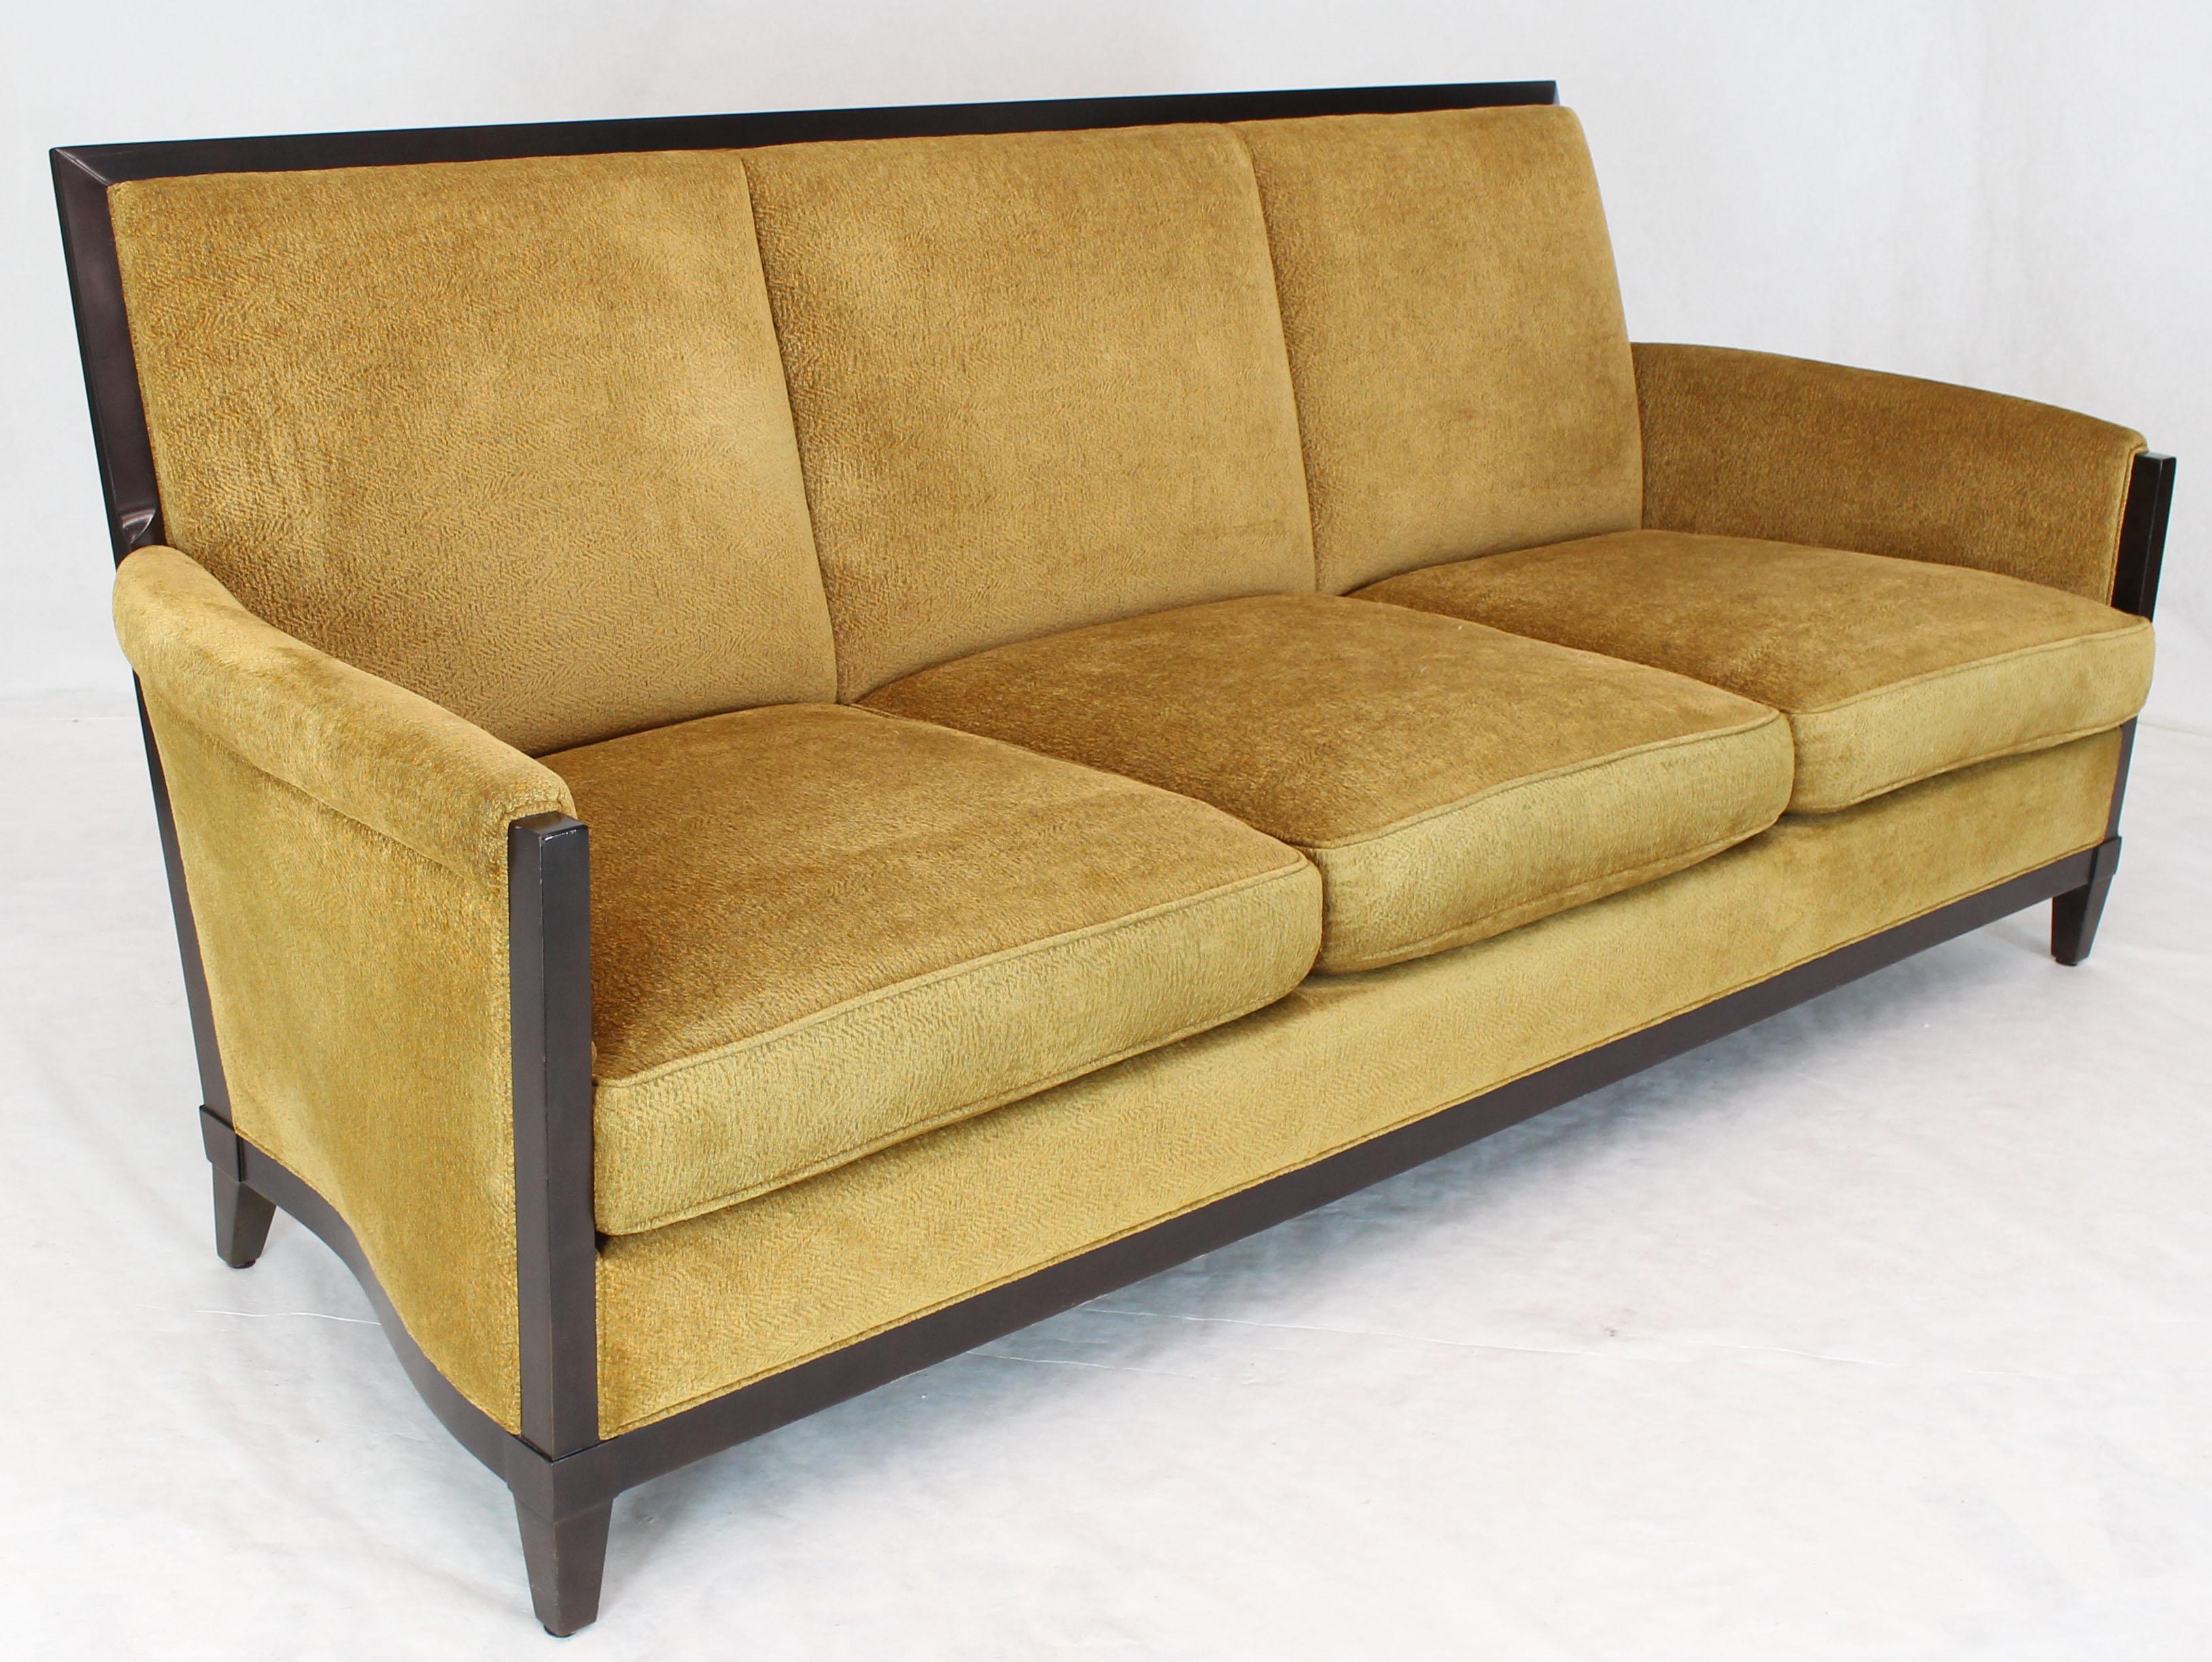 20th Century Dinghy Modern Luxury Sofa Chenille Upholstery Dark Chocolate Frame Finish For Sale